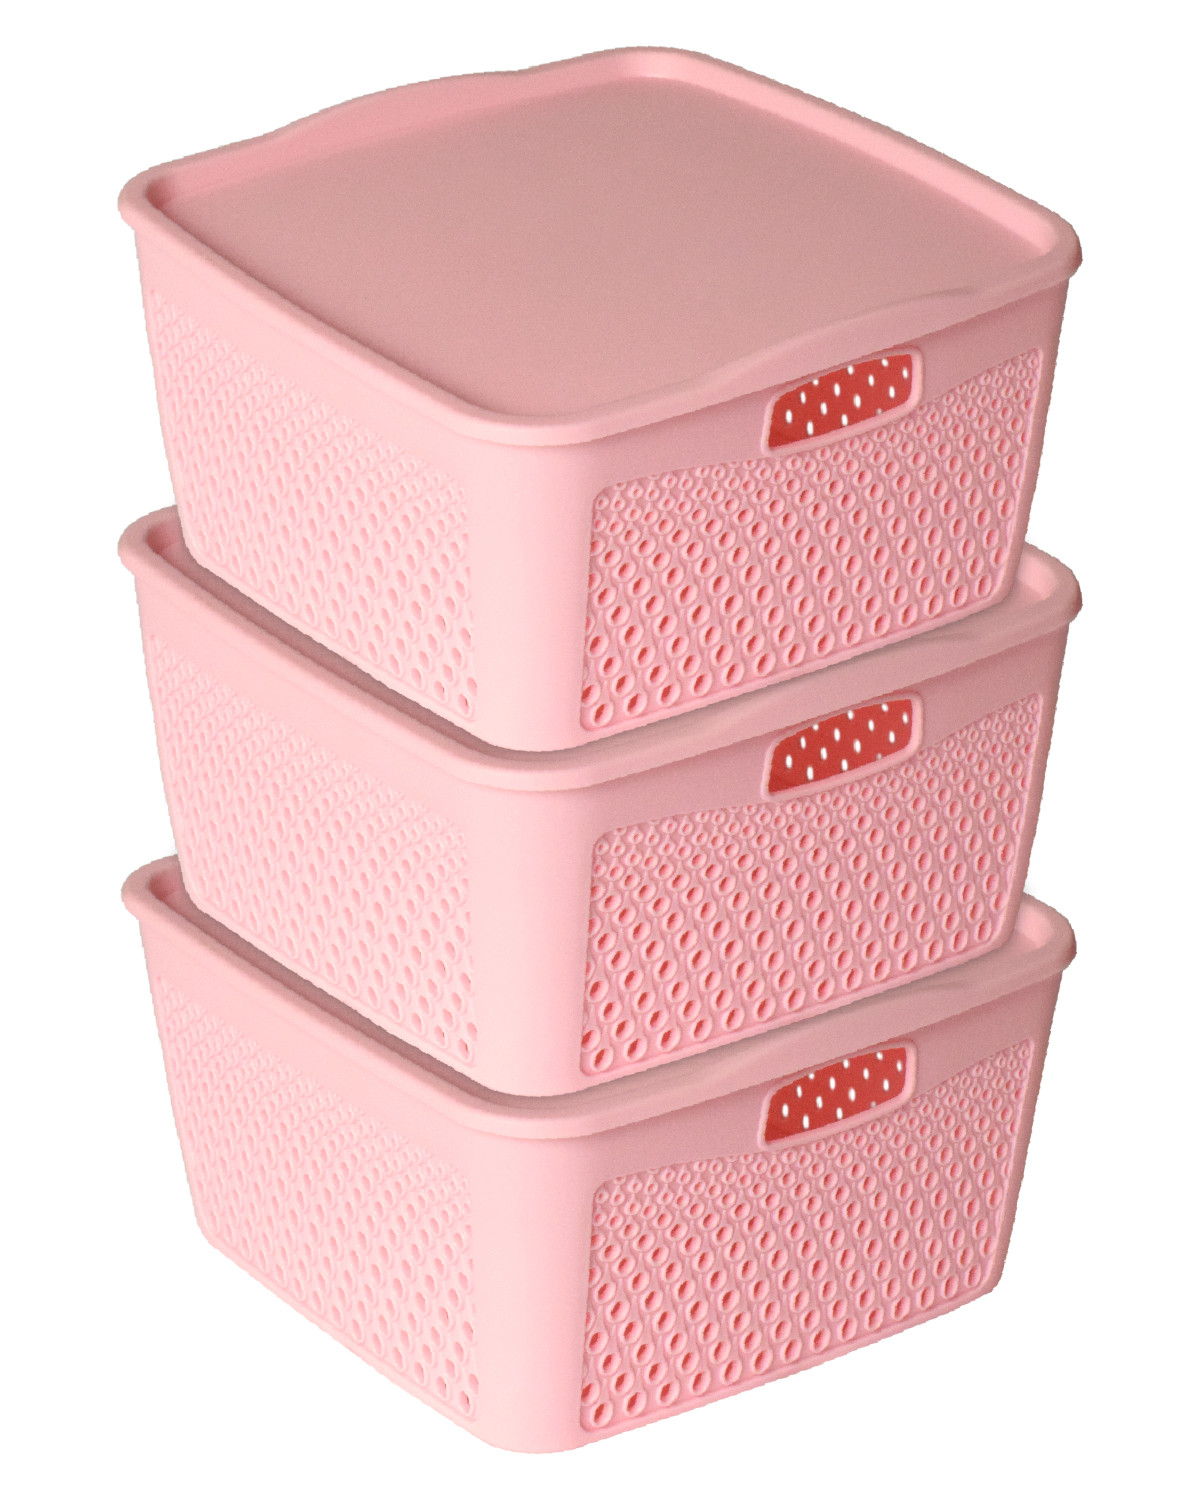 Kuber Industries Netted Design Unbreakable Multipurpose Square Shape Plastic Storage Baskets with lid Large (Pink)